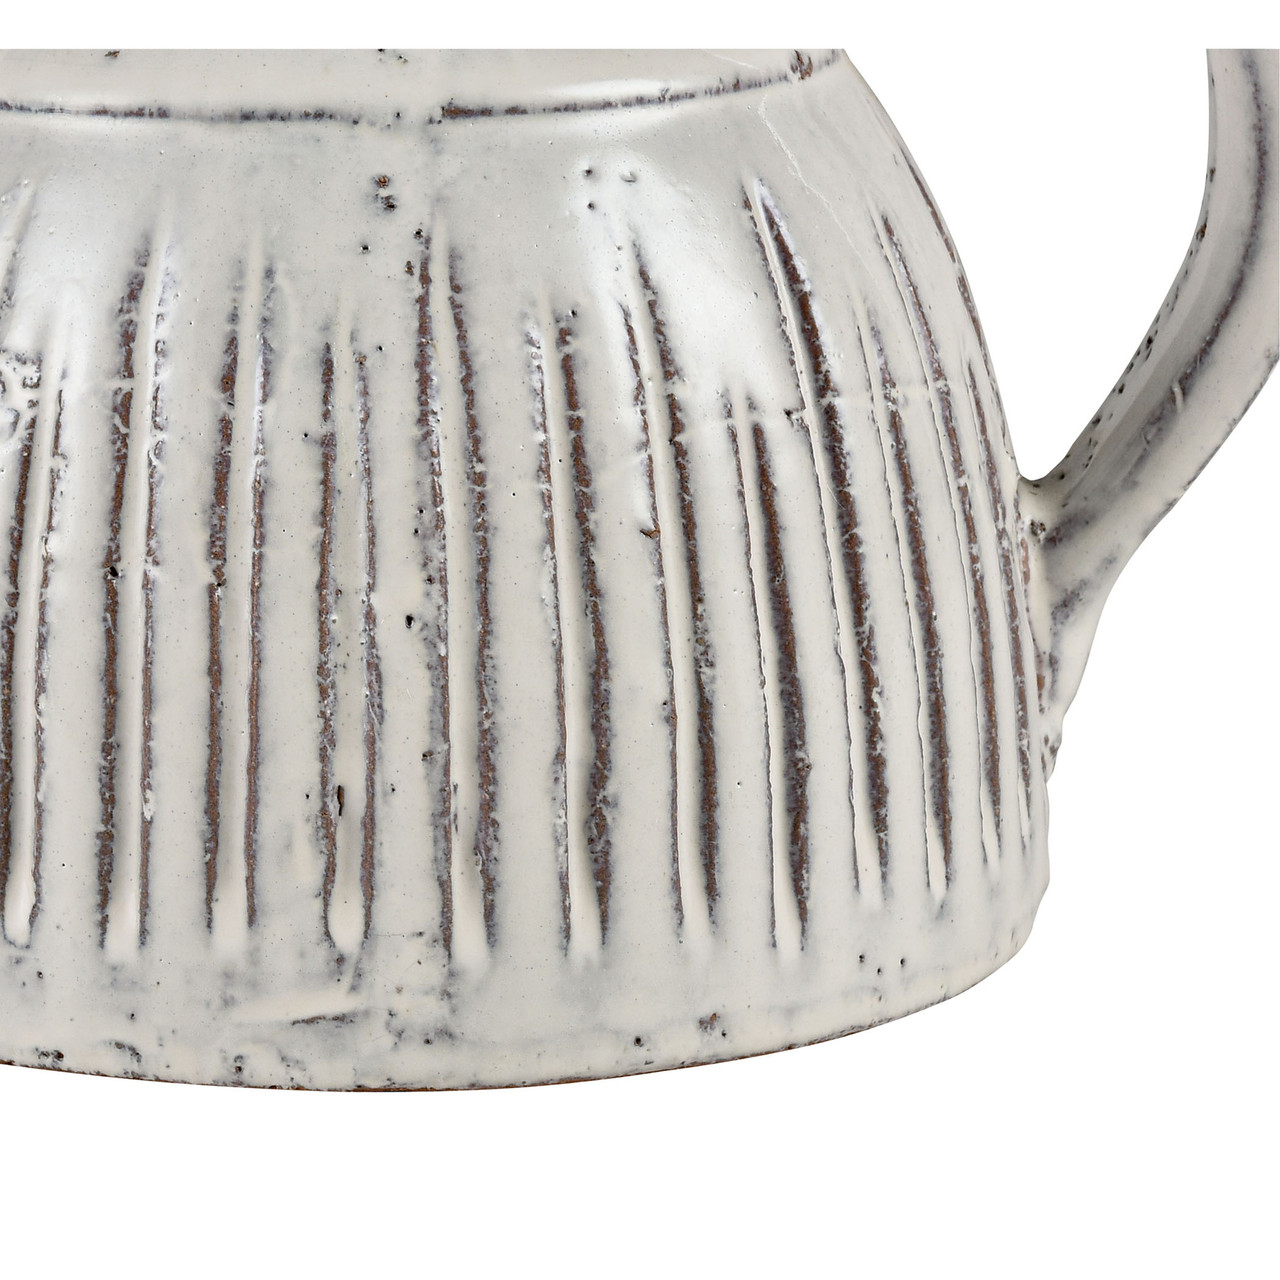 ELK HOME S0017-8211 Muriel Pitcher - Small Aged White Glazed